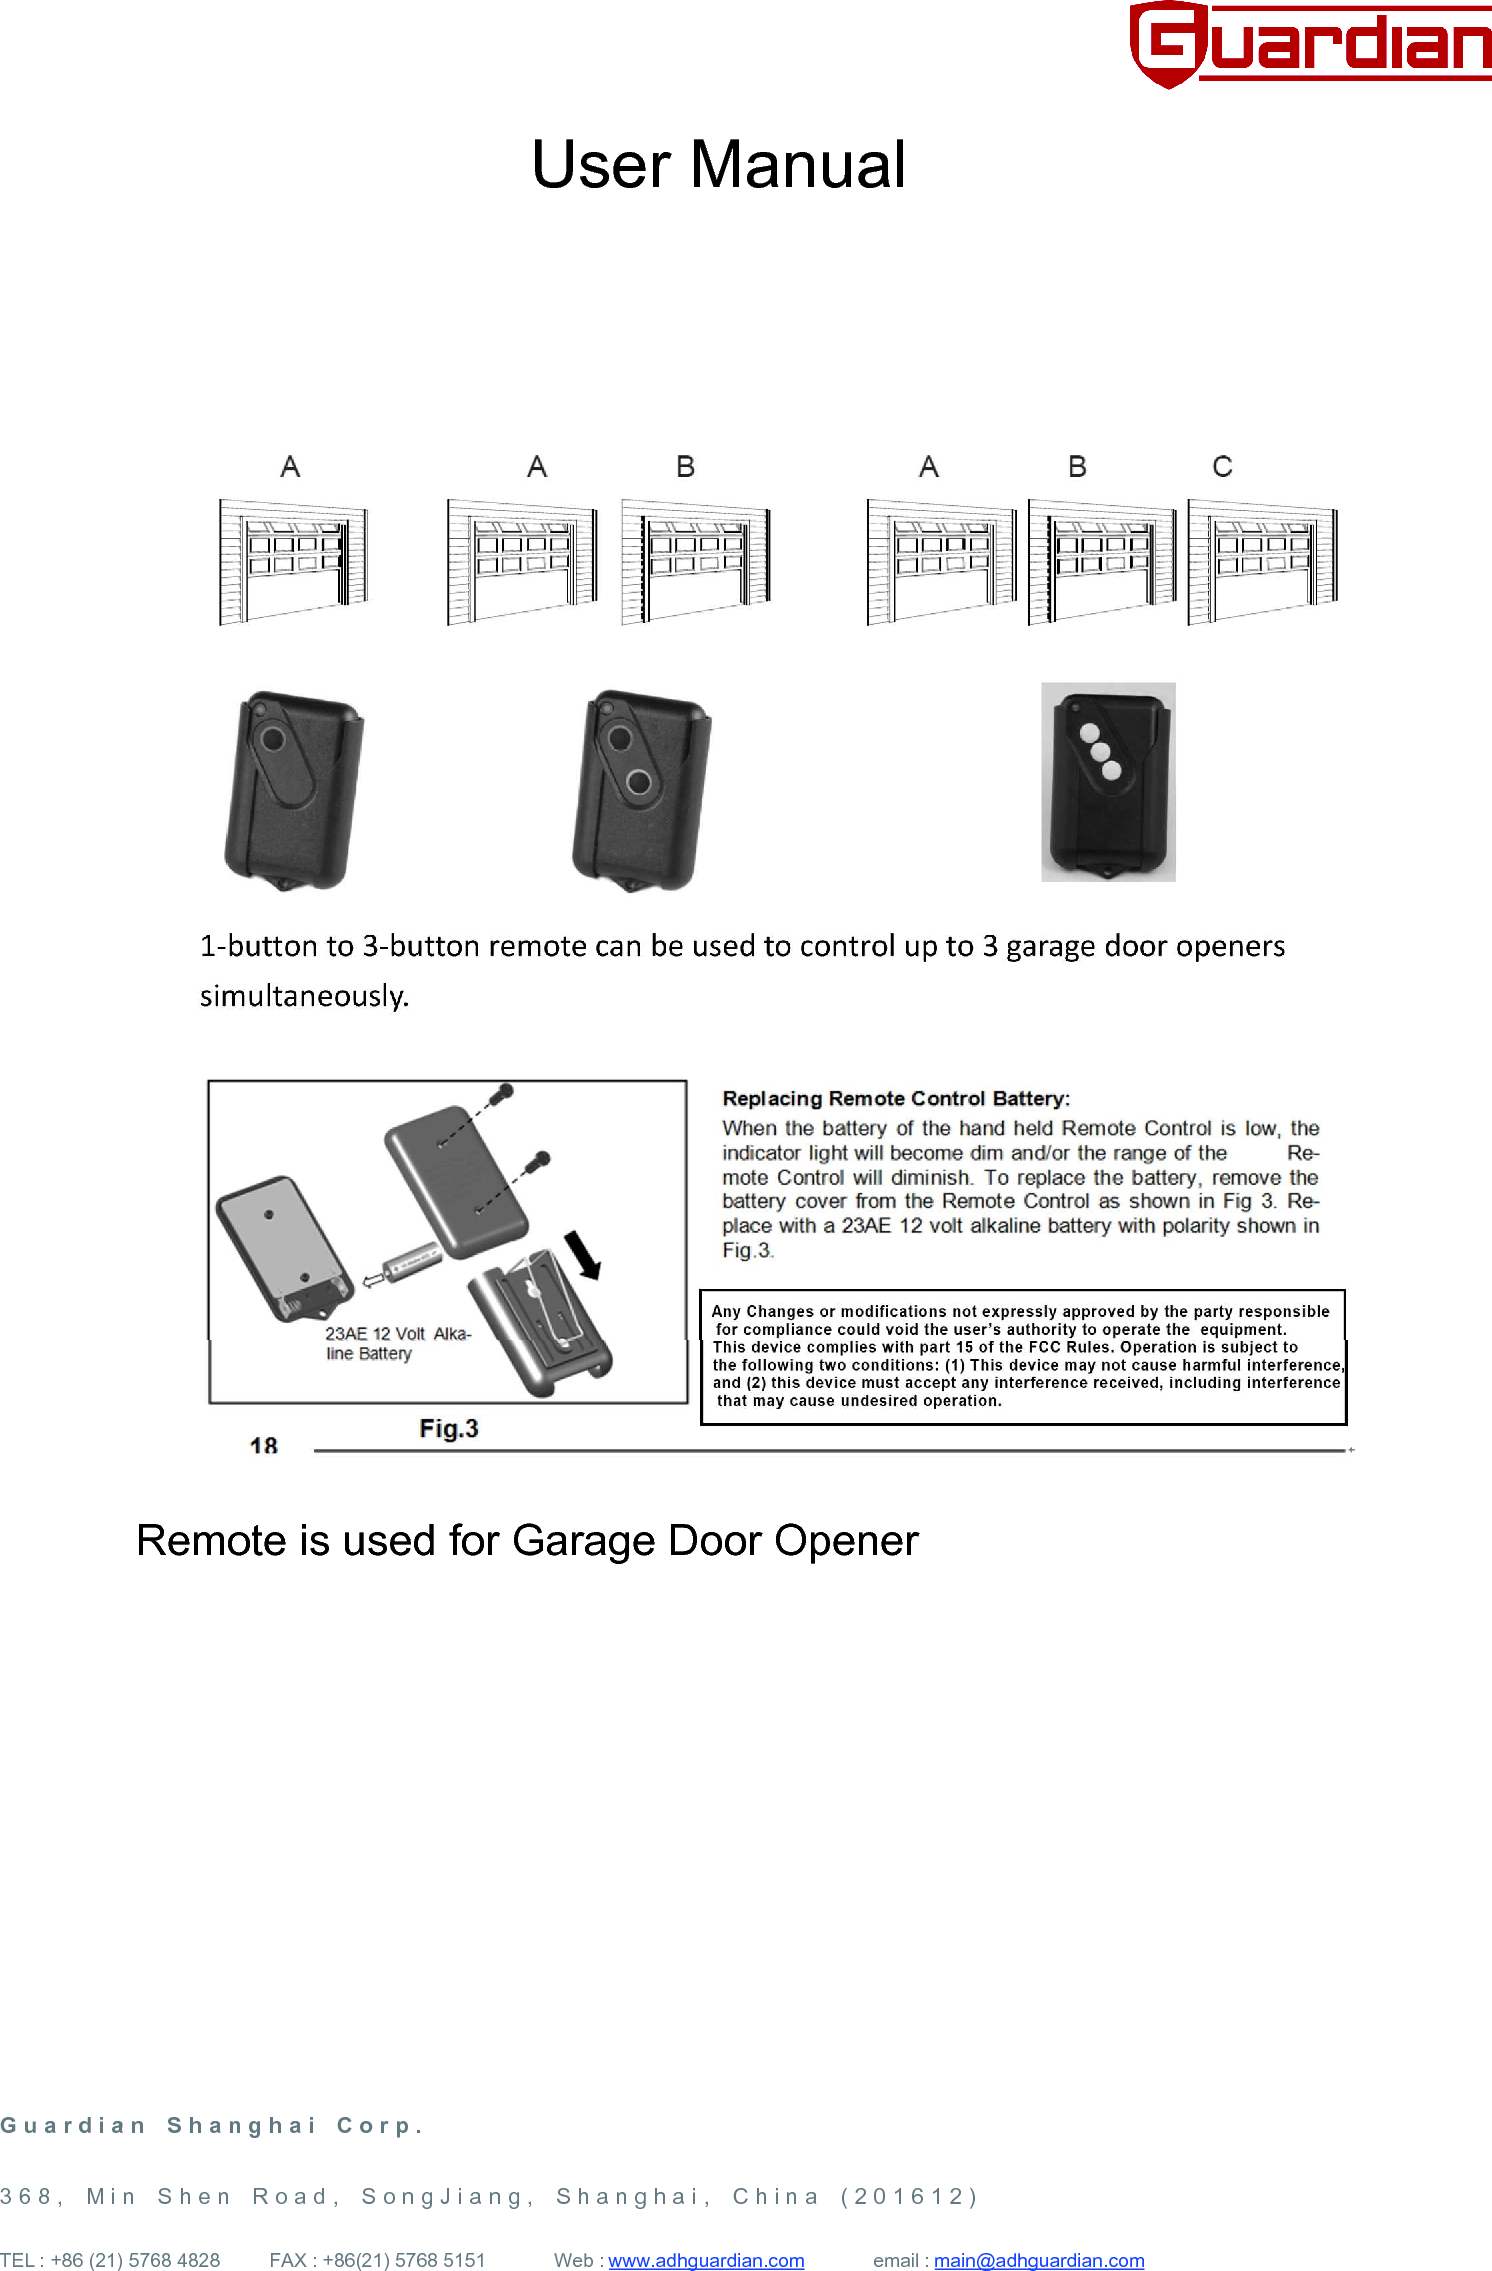 User ManualRemote is used for Garage Door OpenerG u a r d i a n  S h a n g h a i  C o r p .  3 6 8 ,  M i n  S h e n  R o a d ,  S o n g J i a n g ,  S h a n g h a i ,  C h i n a  ( 2 0 1 6 1 2 ) TEL : +86 (21) 5768 4828      FAX : +86(21) 5768 5151        Web : www.adhguardian.com       email : main@adhguardian.com 